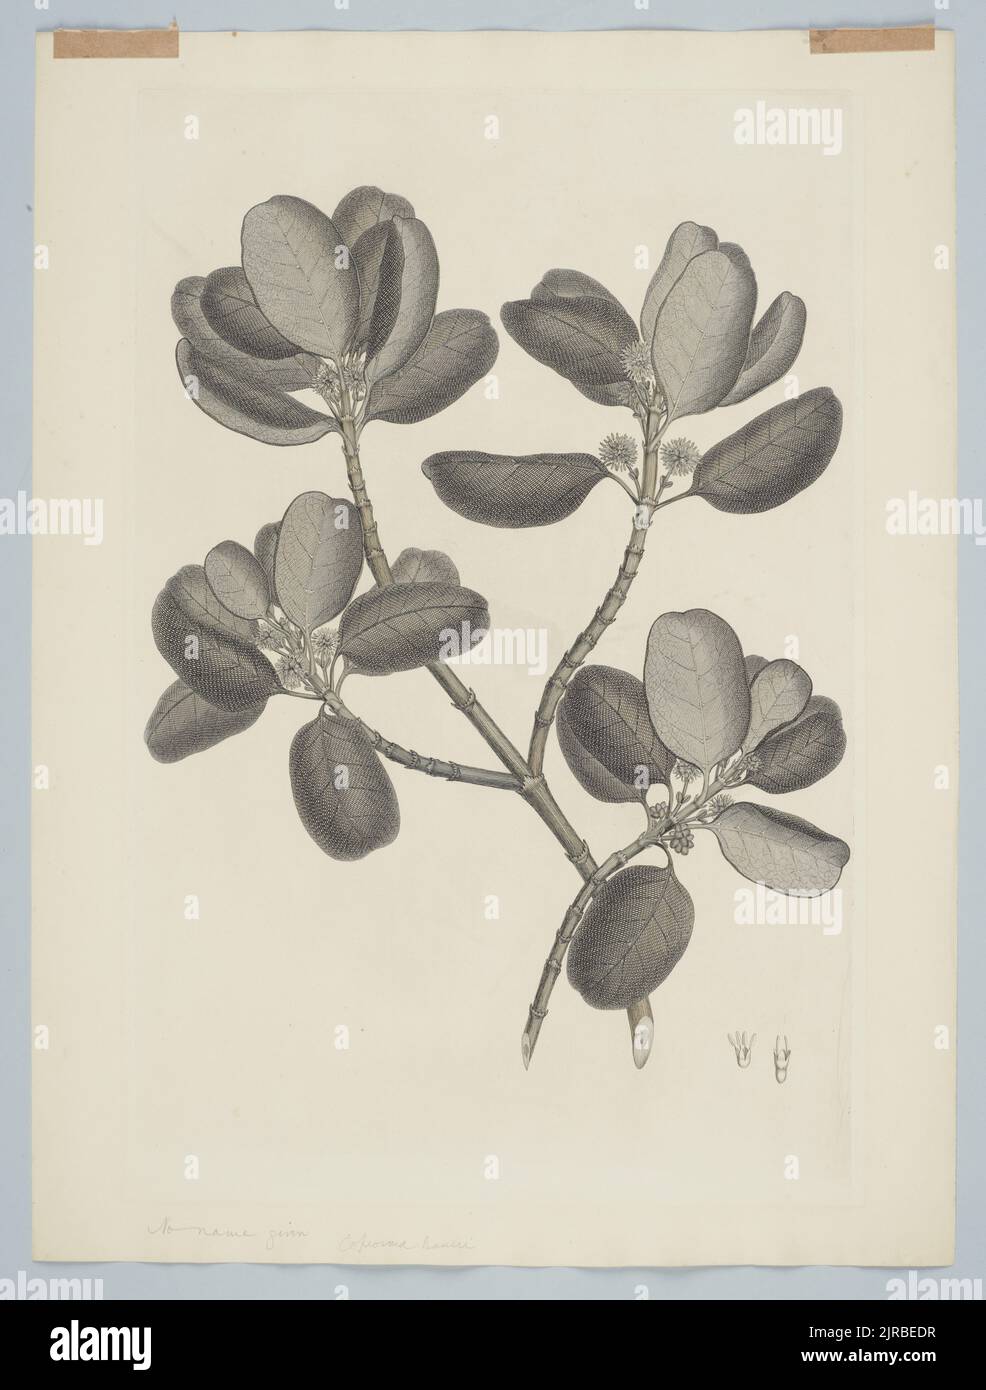 Coprosma repens A. Richard, 1895, United Kingdom, by Sydney Parkinson. Gift of the British Museum, 1895. Stock Photo